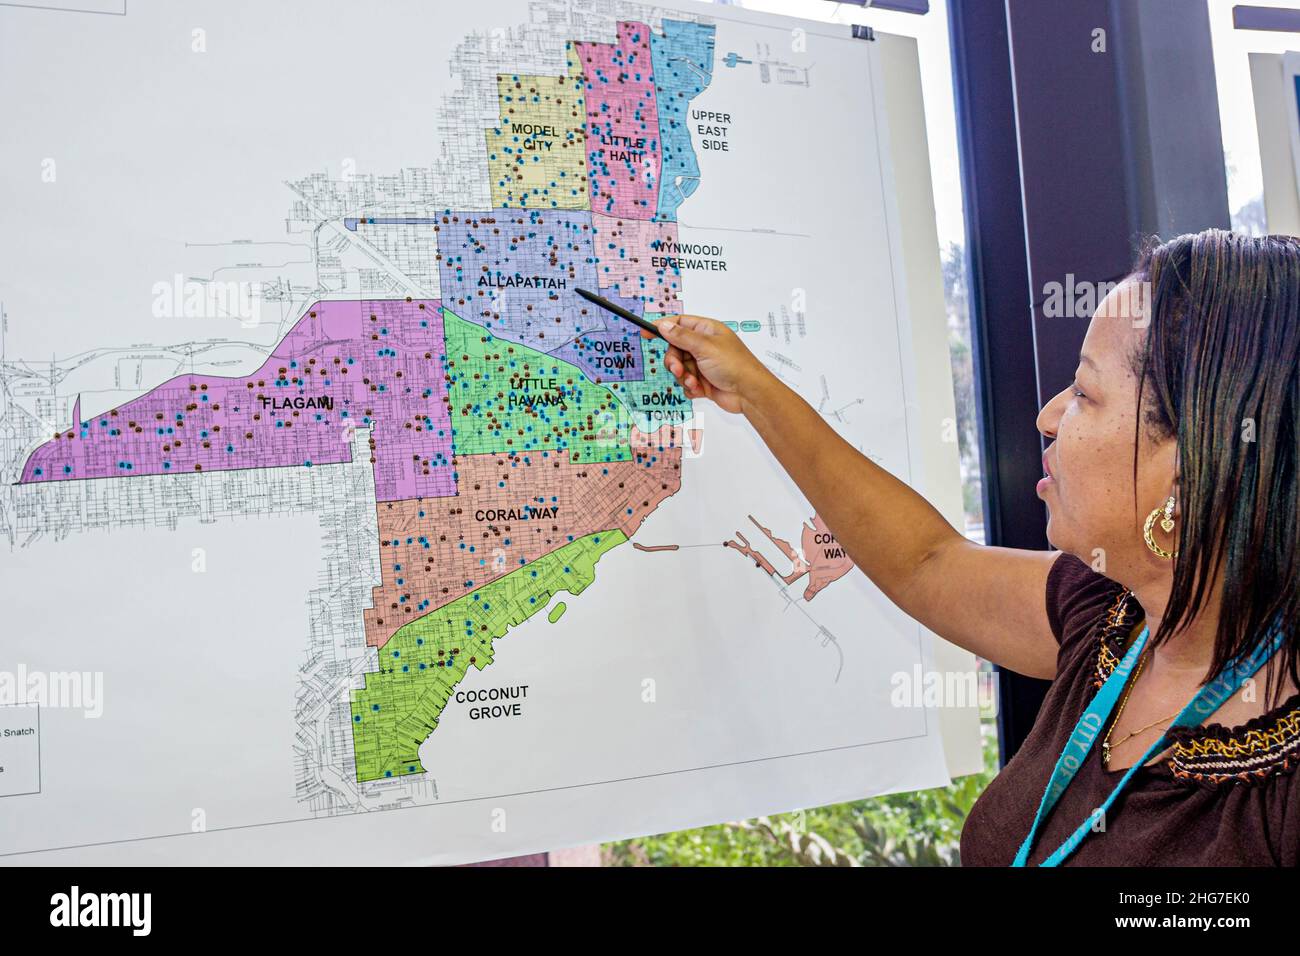 Miami Florida,Riverside Center,centre,GIS Day,Geographic Information Systems,exhibit exhibition collection maps,Black woman female women,crime statist Stock Photo